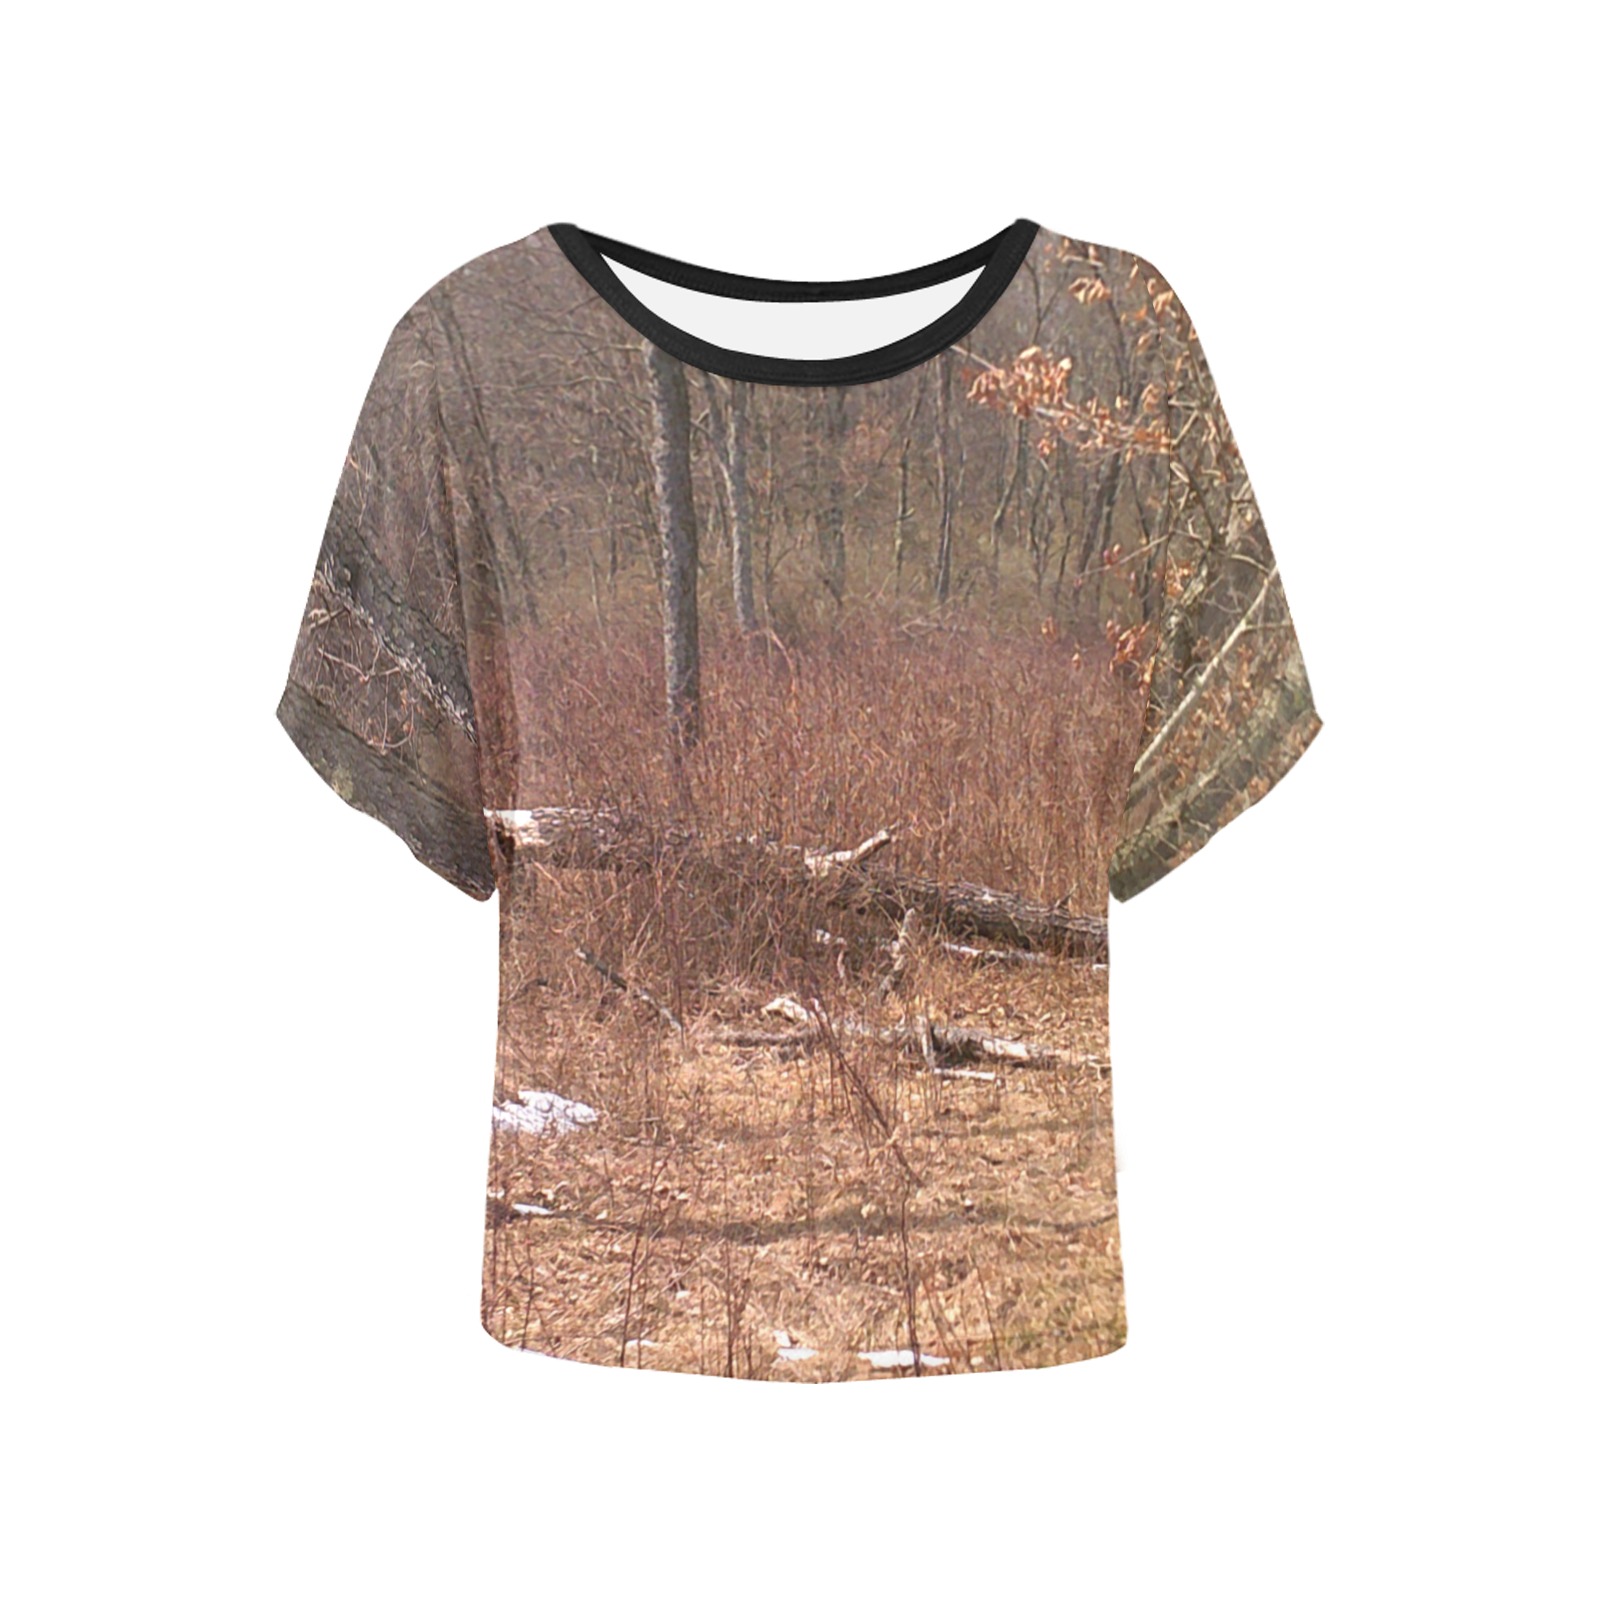 Falling tree in the woods Women's Batwing-Sleeved Blouse T shirt (Model T44)